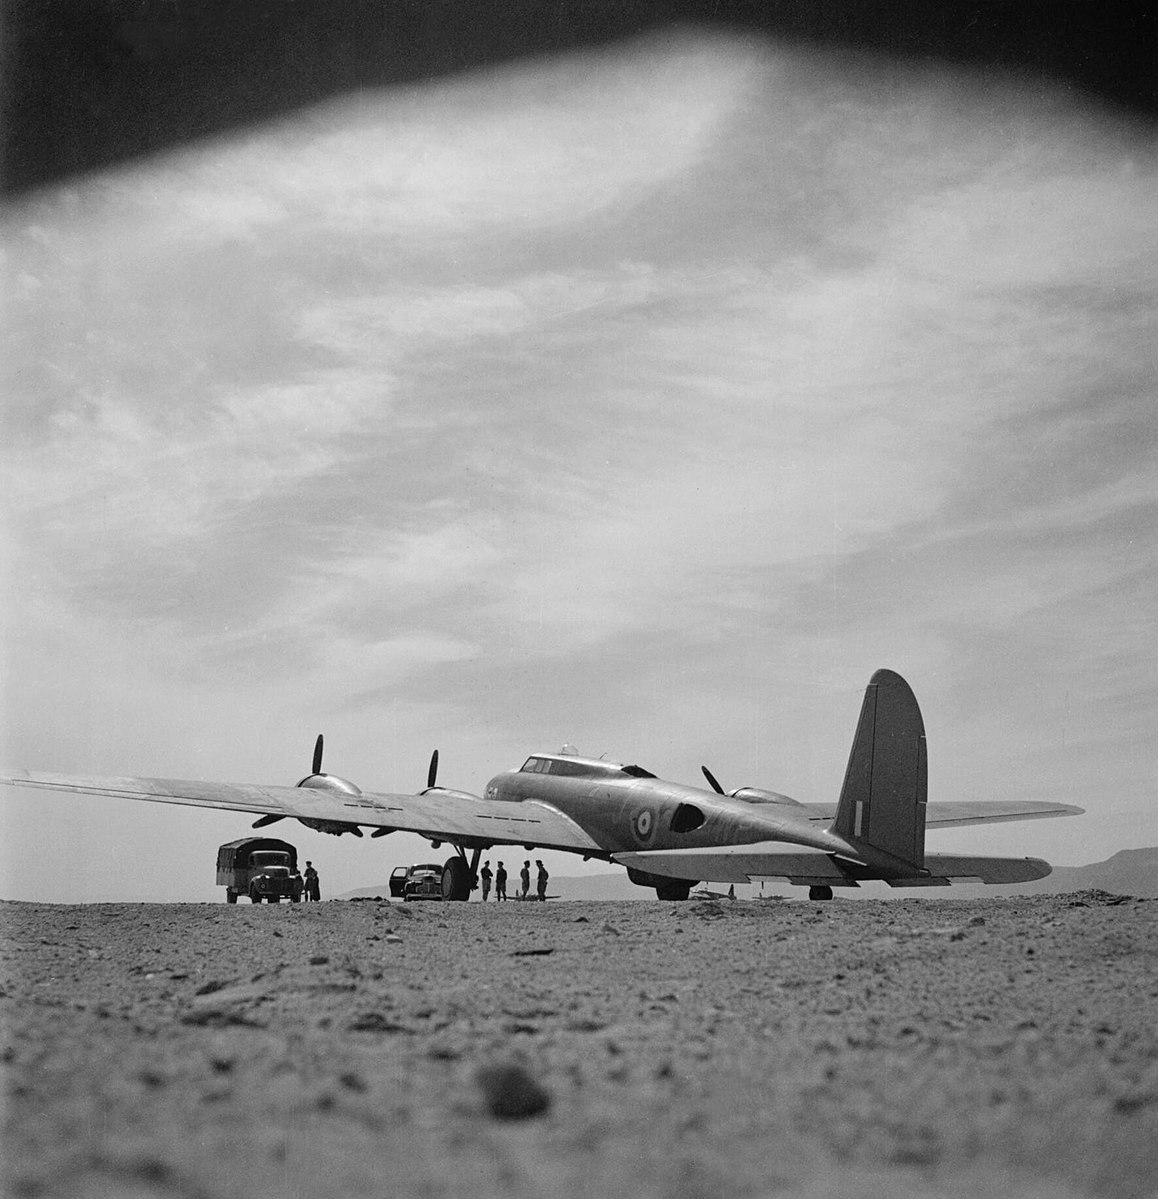 The first to be downed as a result of enemy action came on August 16, when 90 Squadron continued its pursuit of Gneisenau. Two He 113s attacked AN532 at 30,000ft in the highest interception of the war so far. The B-17 eventually crash-landed at RAF Roborough, killing two. 11/15